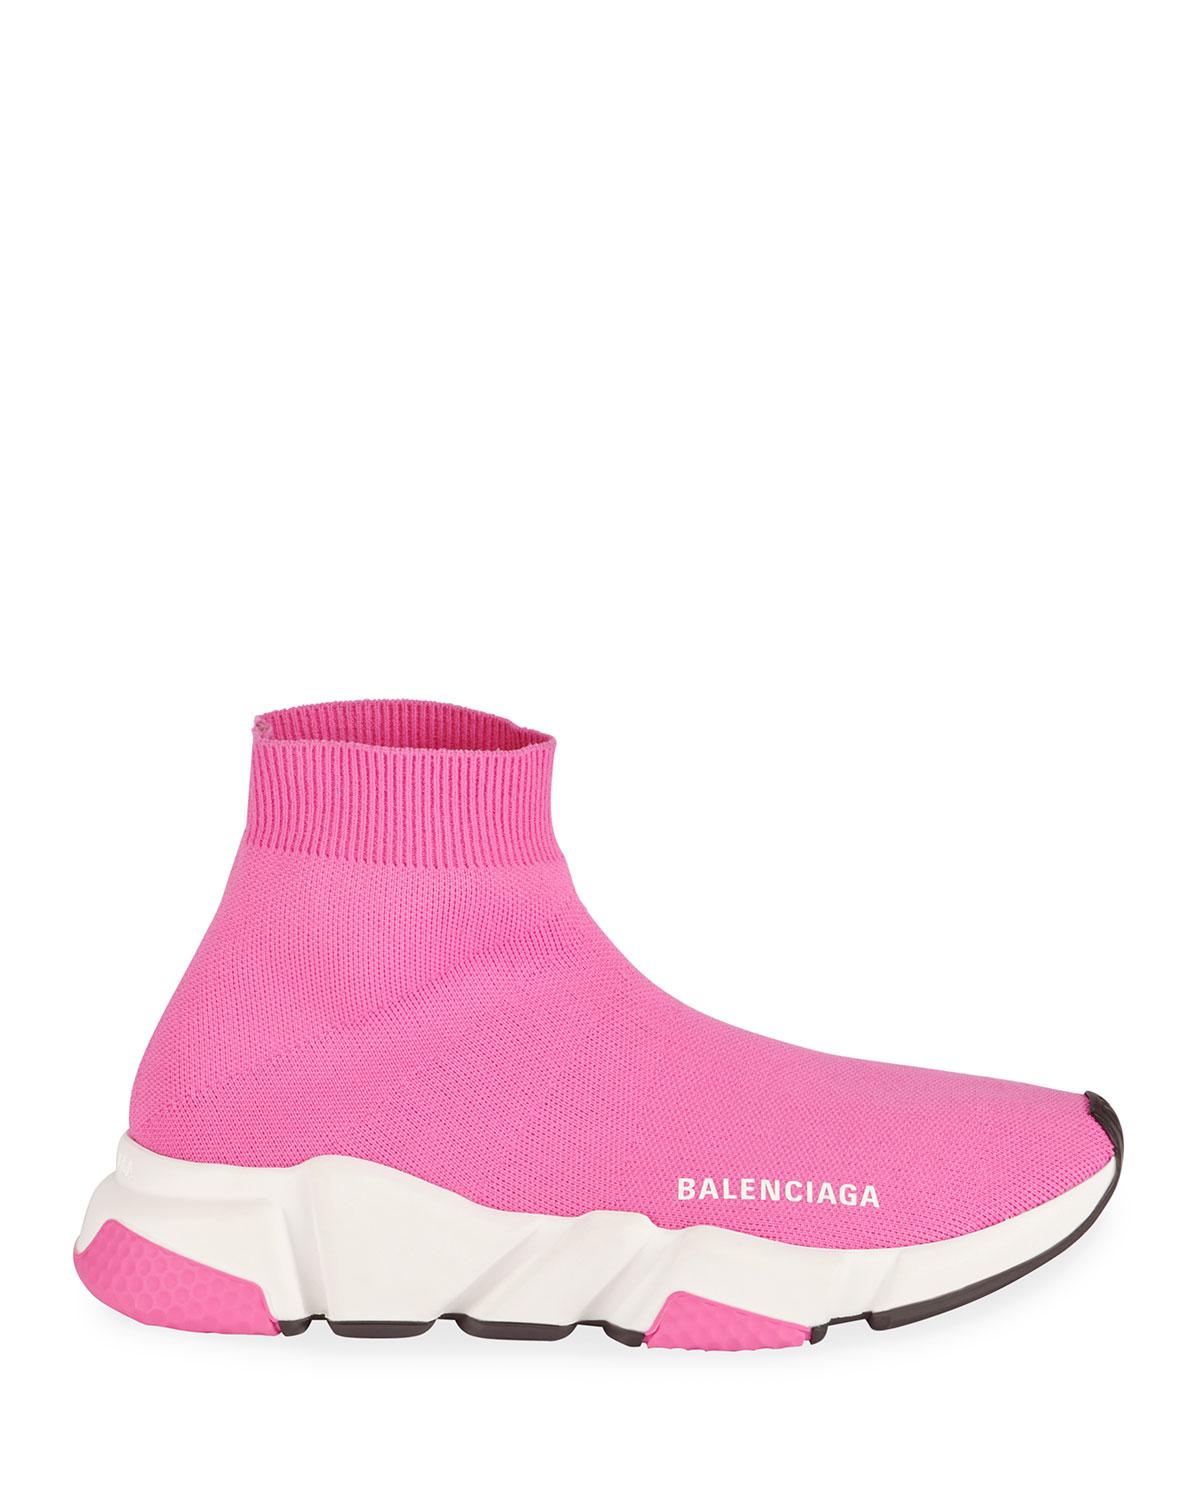 Balenciaga Speed Knit Chunky Sneakers in Pink/White (Pink) - Lyst